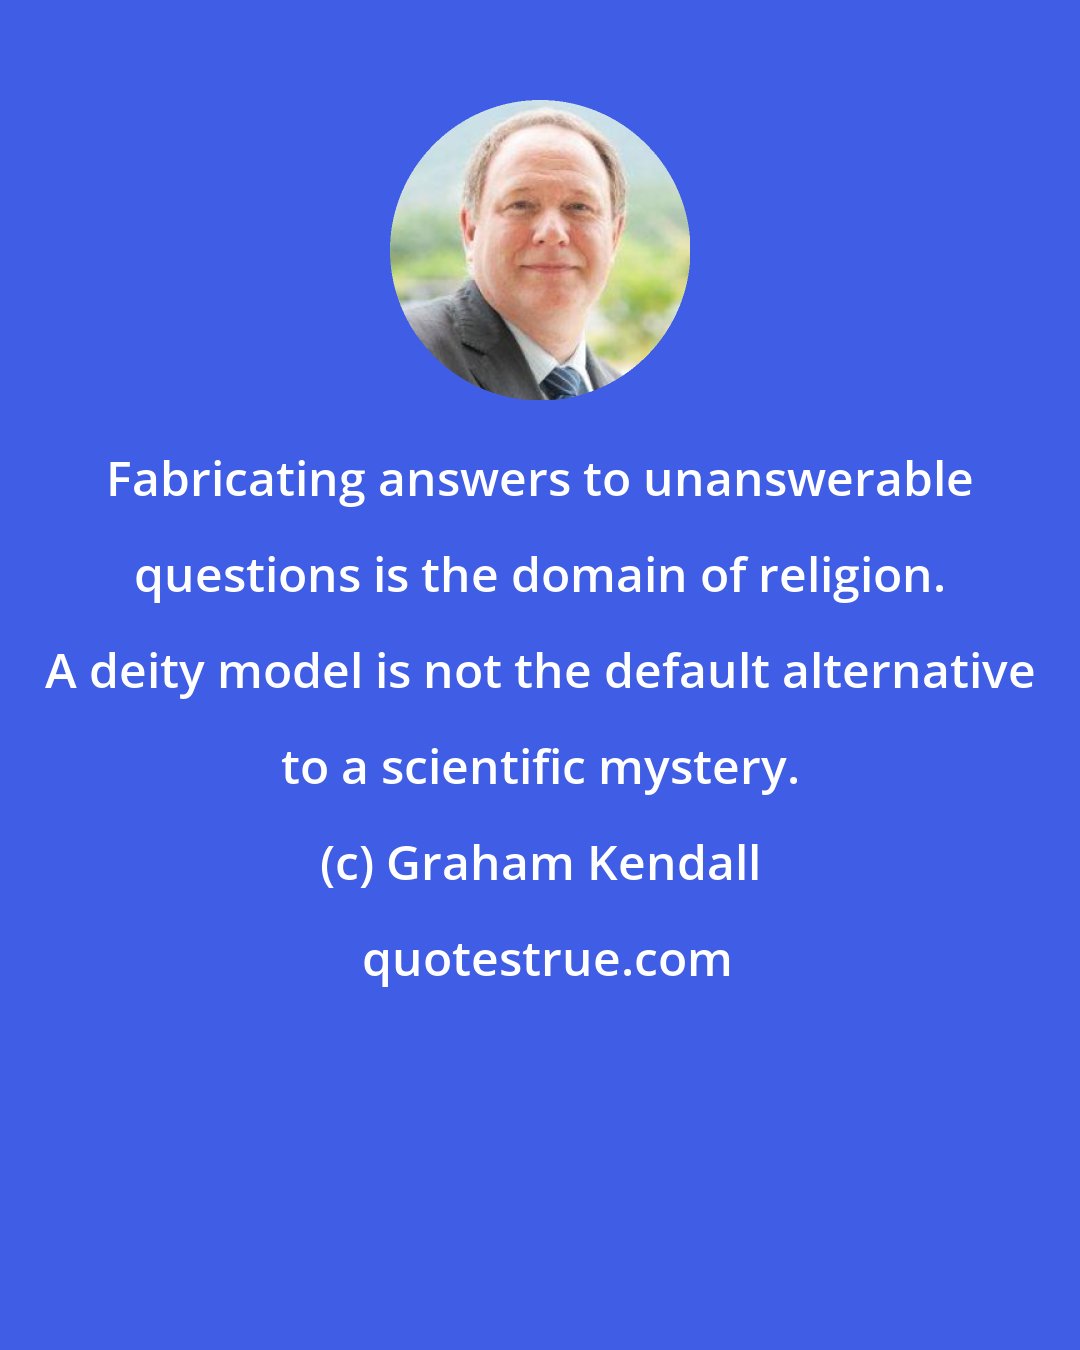 Graham Kendall: Fabricating answers to unanswerable questions is the domain of religion. A deity model is not the default alternative to a scientific mystery.